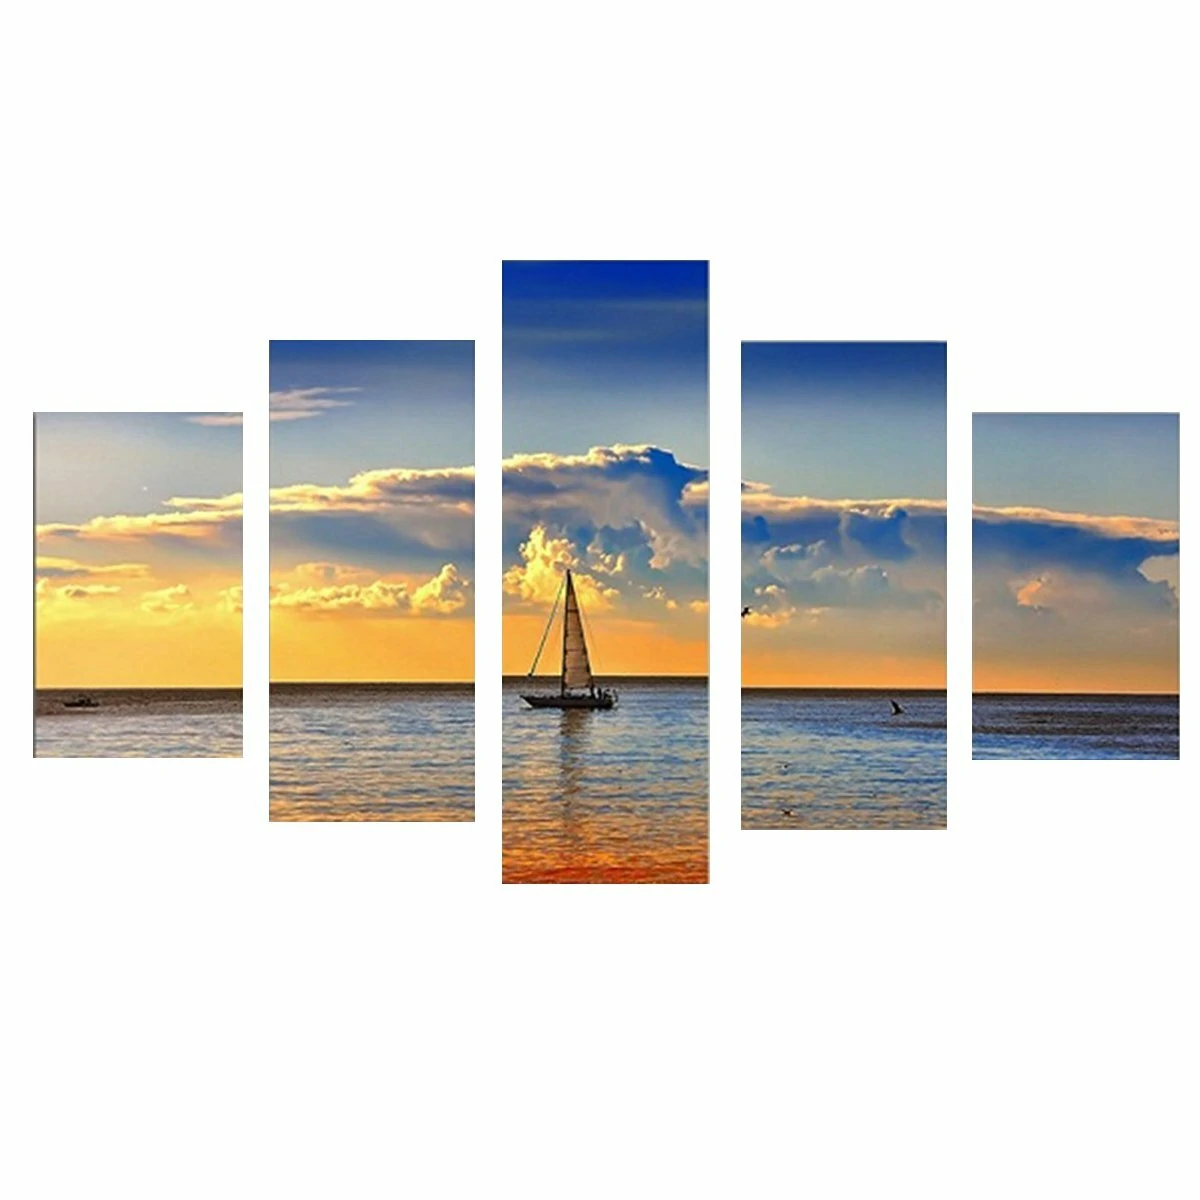 5pcs sunset sailing boat canvas print paintings wall decorative print art pictures frameless wall hanging decorations for home office